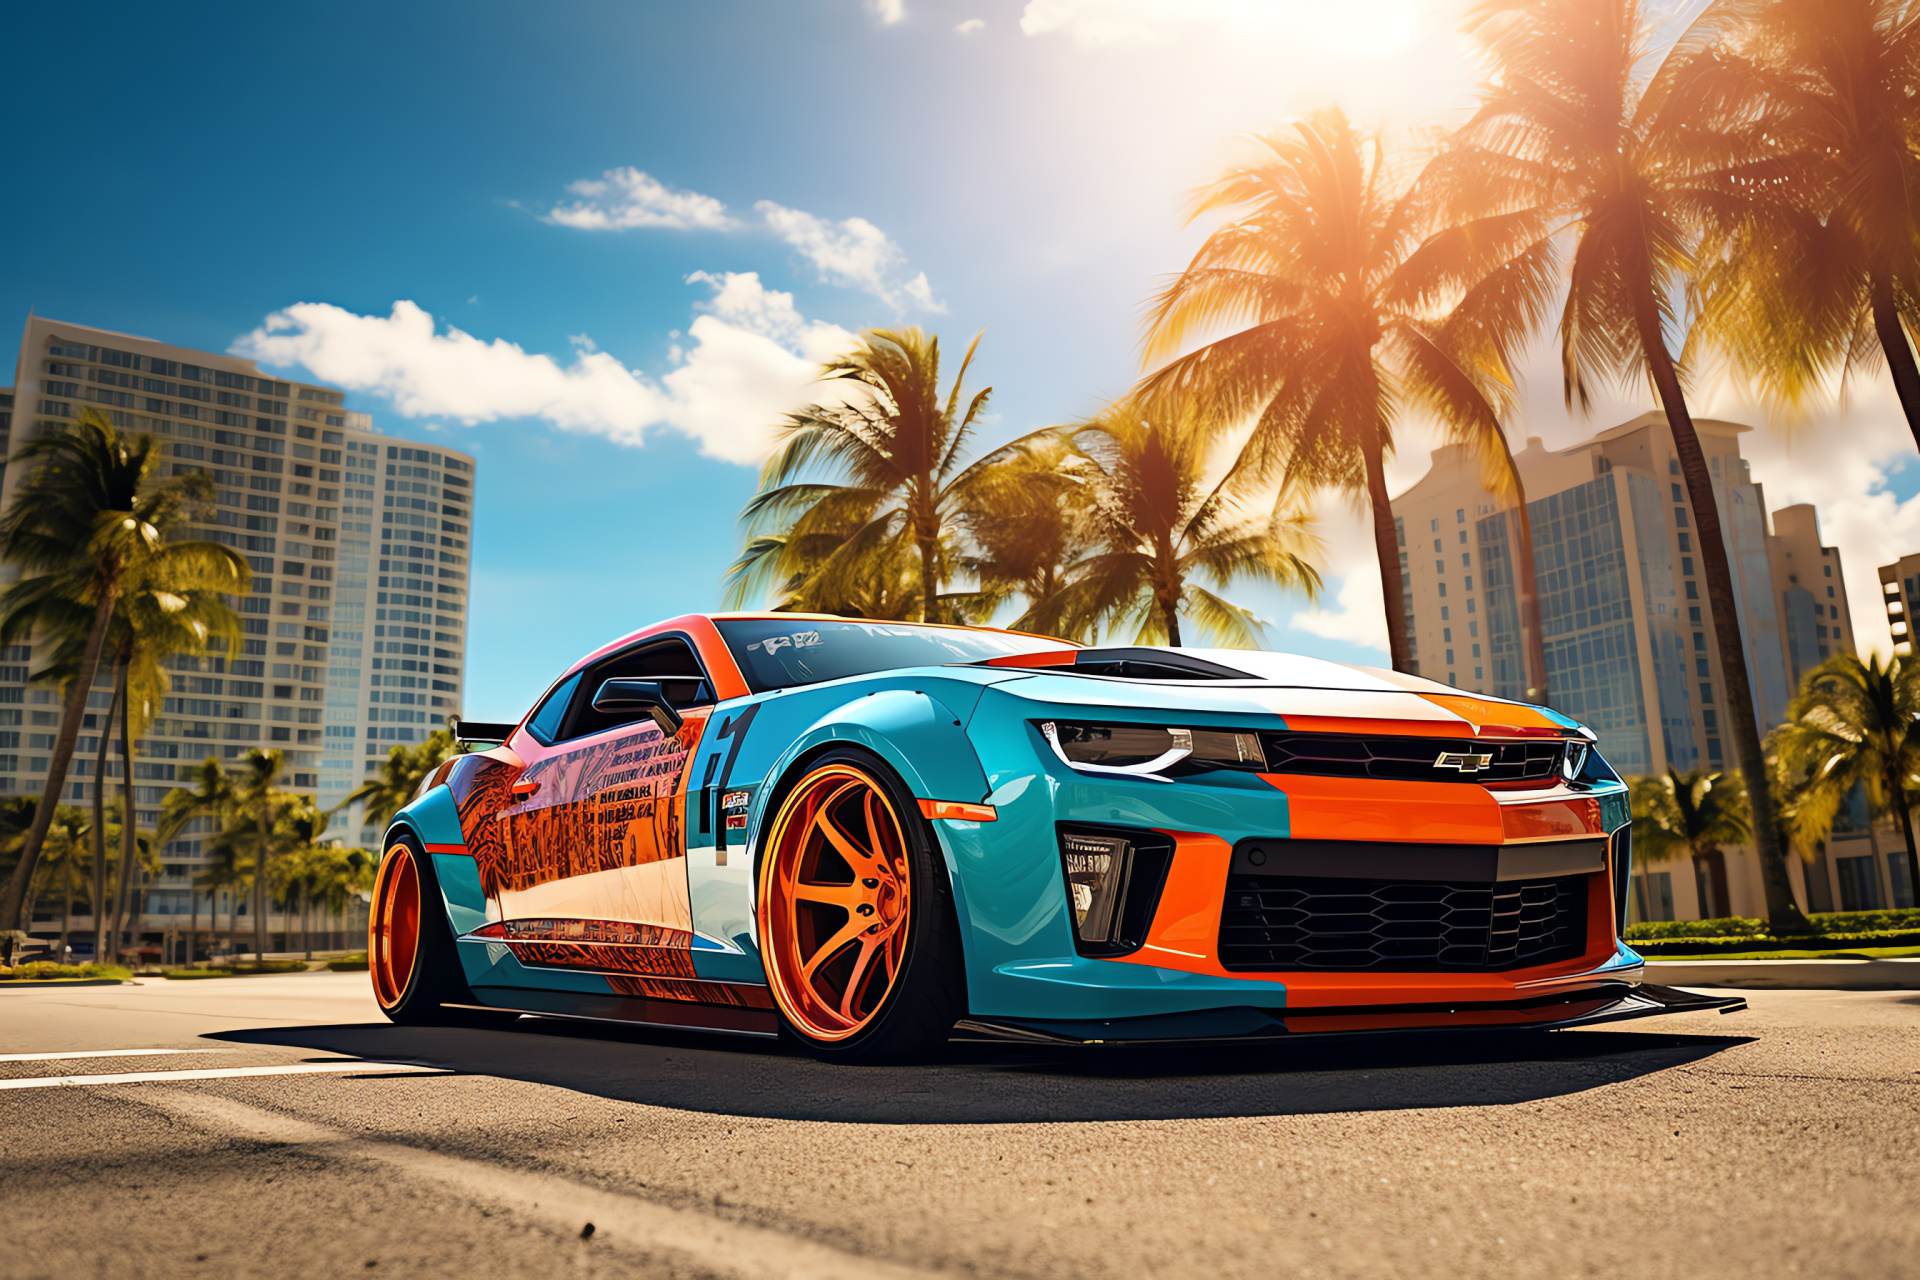 American muscle revision, Chevrolet Camaro SS, Miami backdrop, Aerodynamic body work, Ground-level perspective, HD Desktop Image